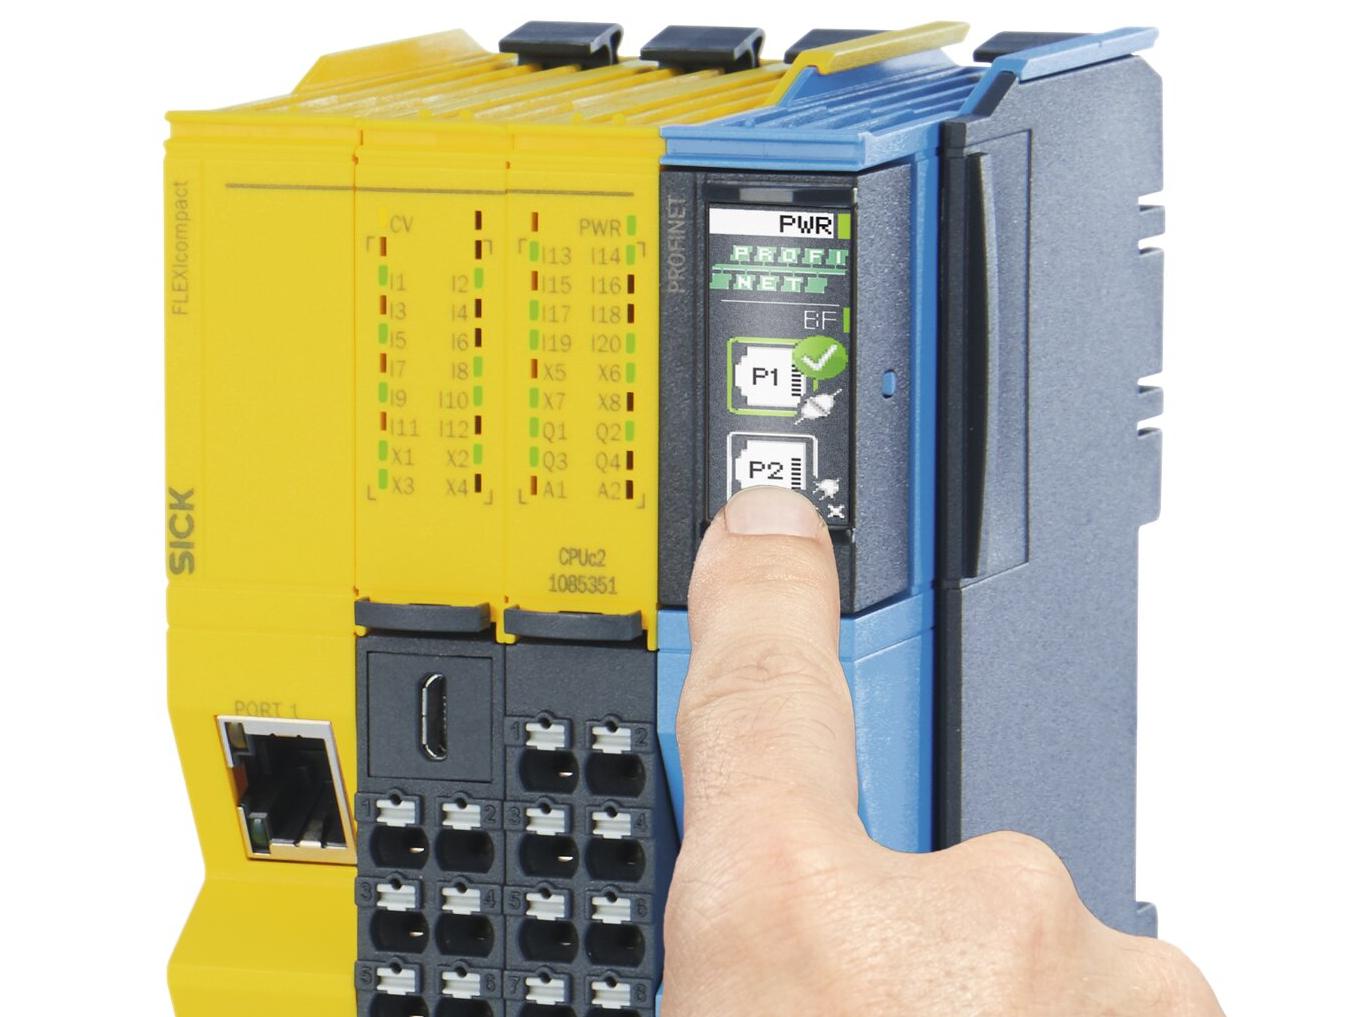 Safety controller has neat and compact look

